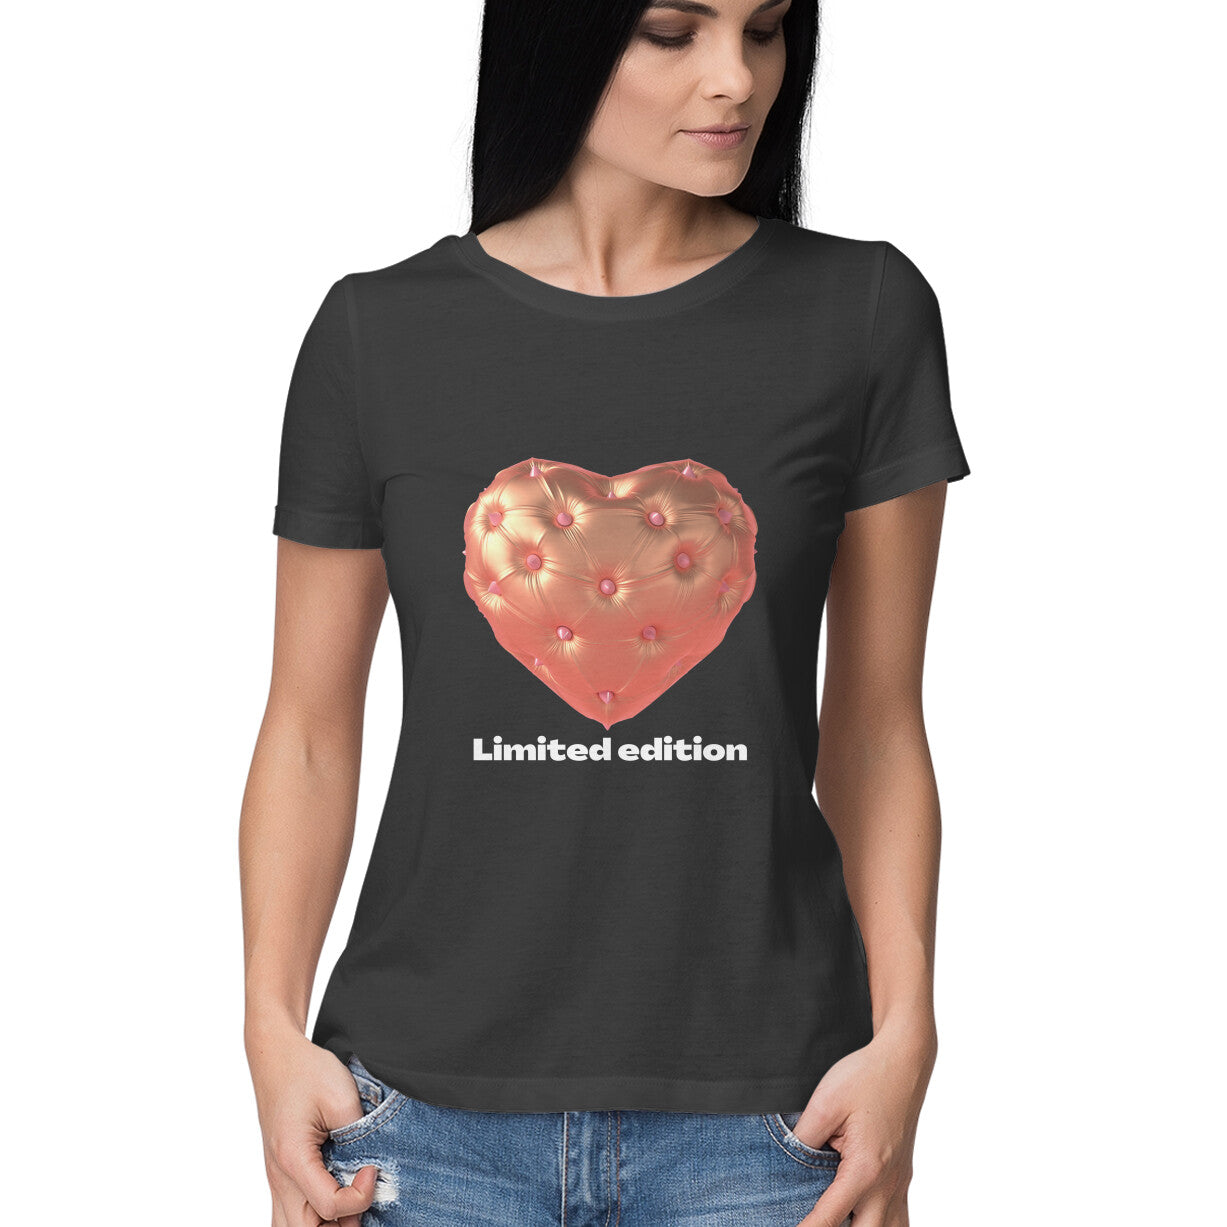 Limited edition in dark colors Women's tee